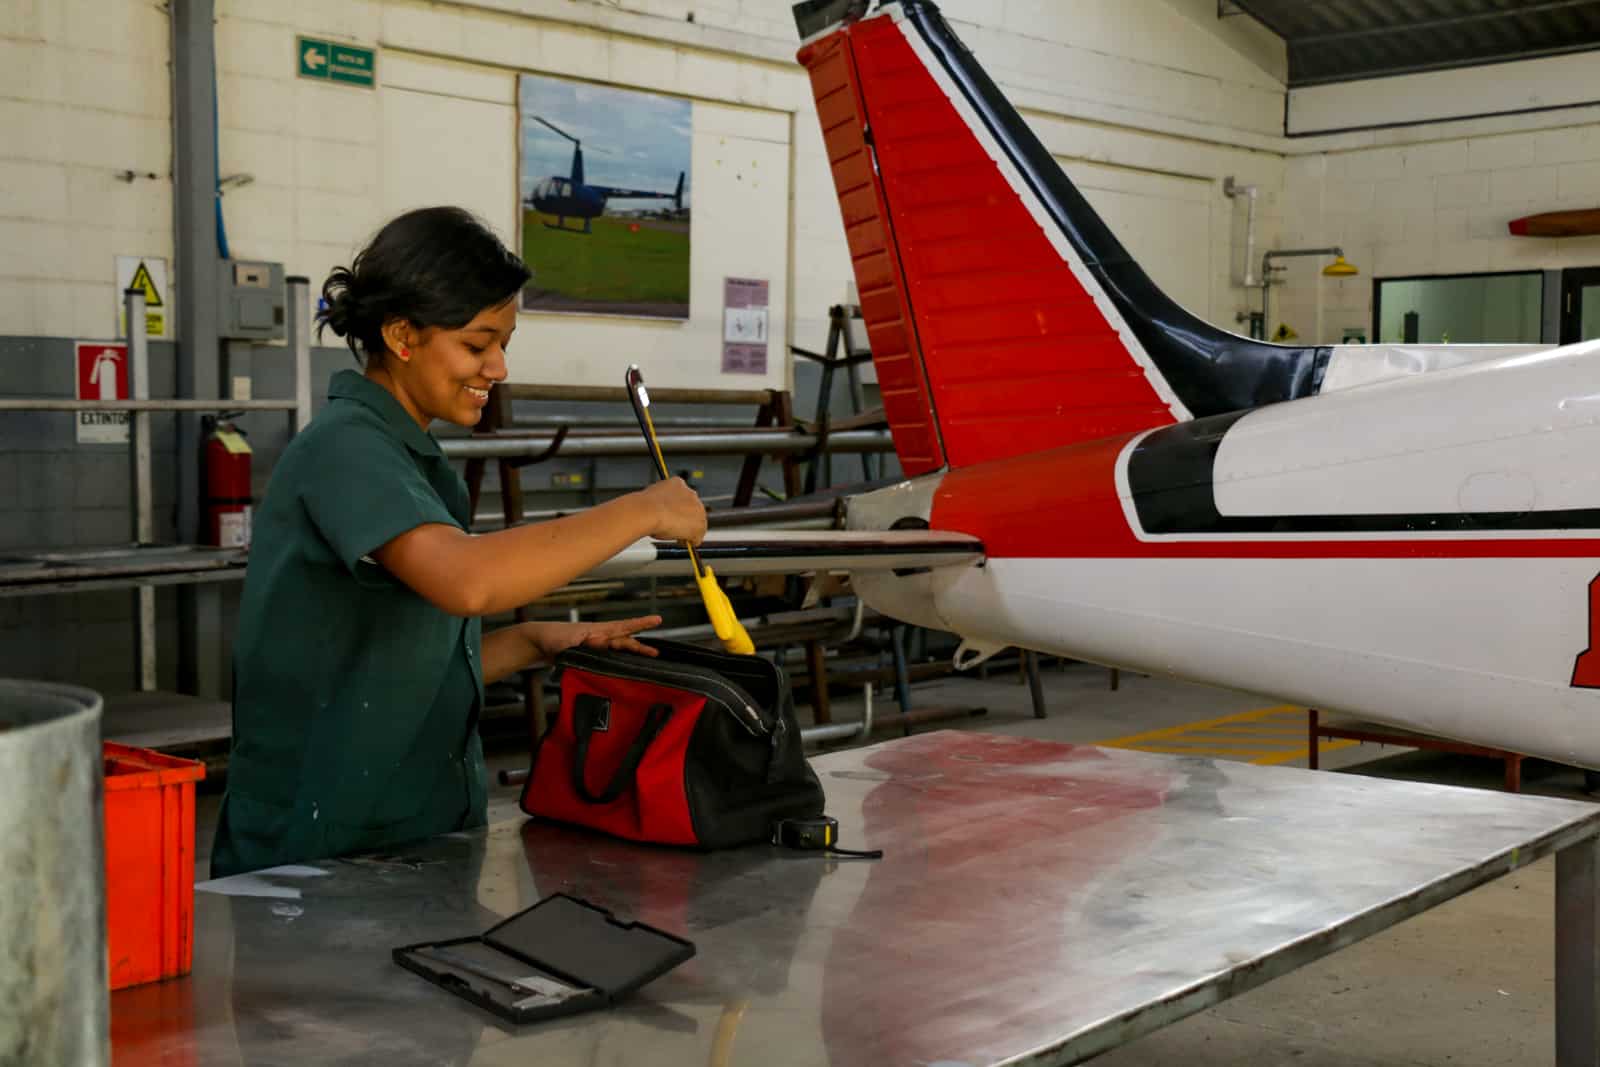 3 Things Paving My Way to Be an Aviation Mechanic